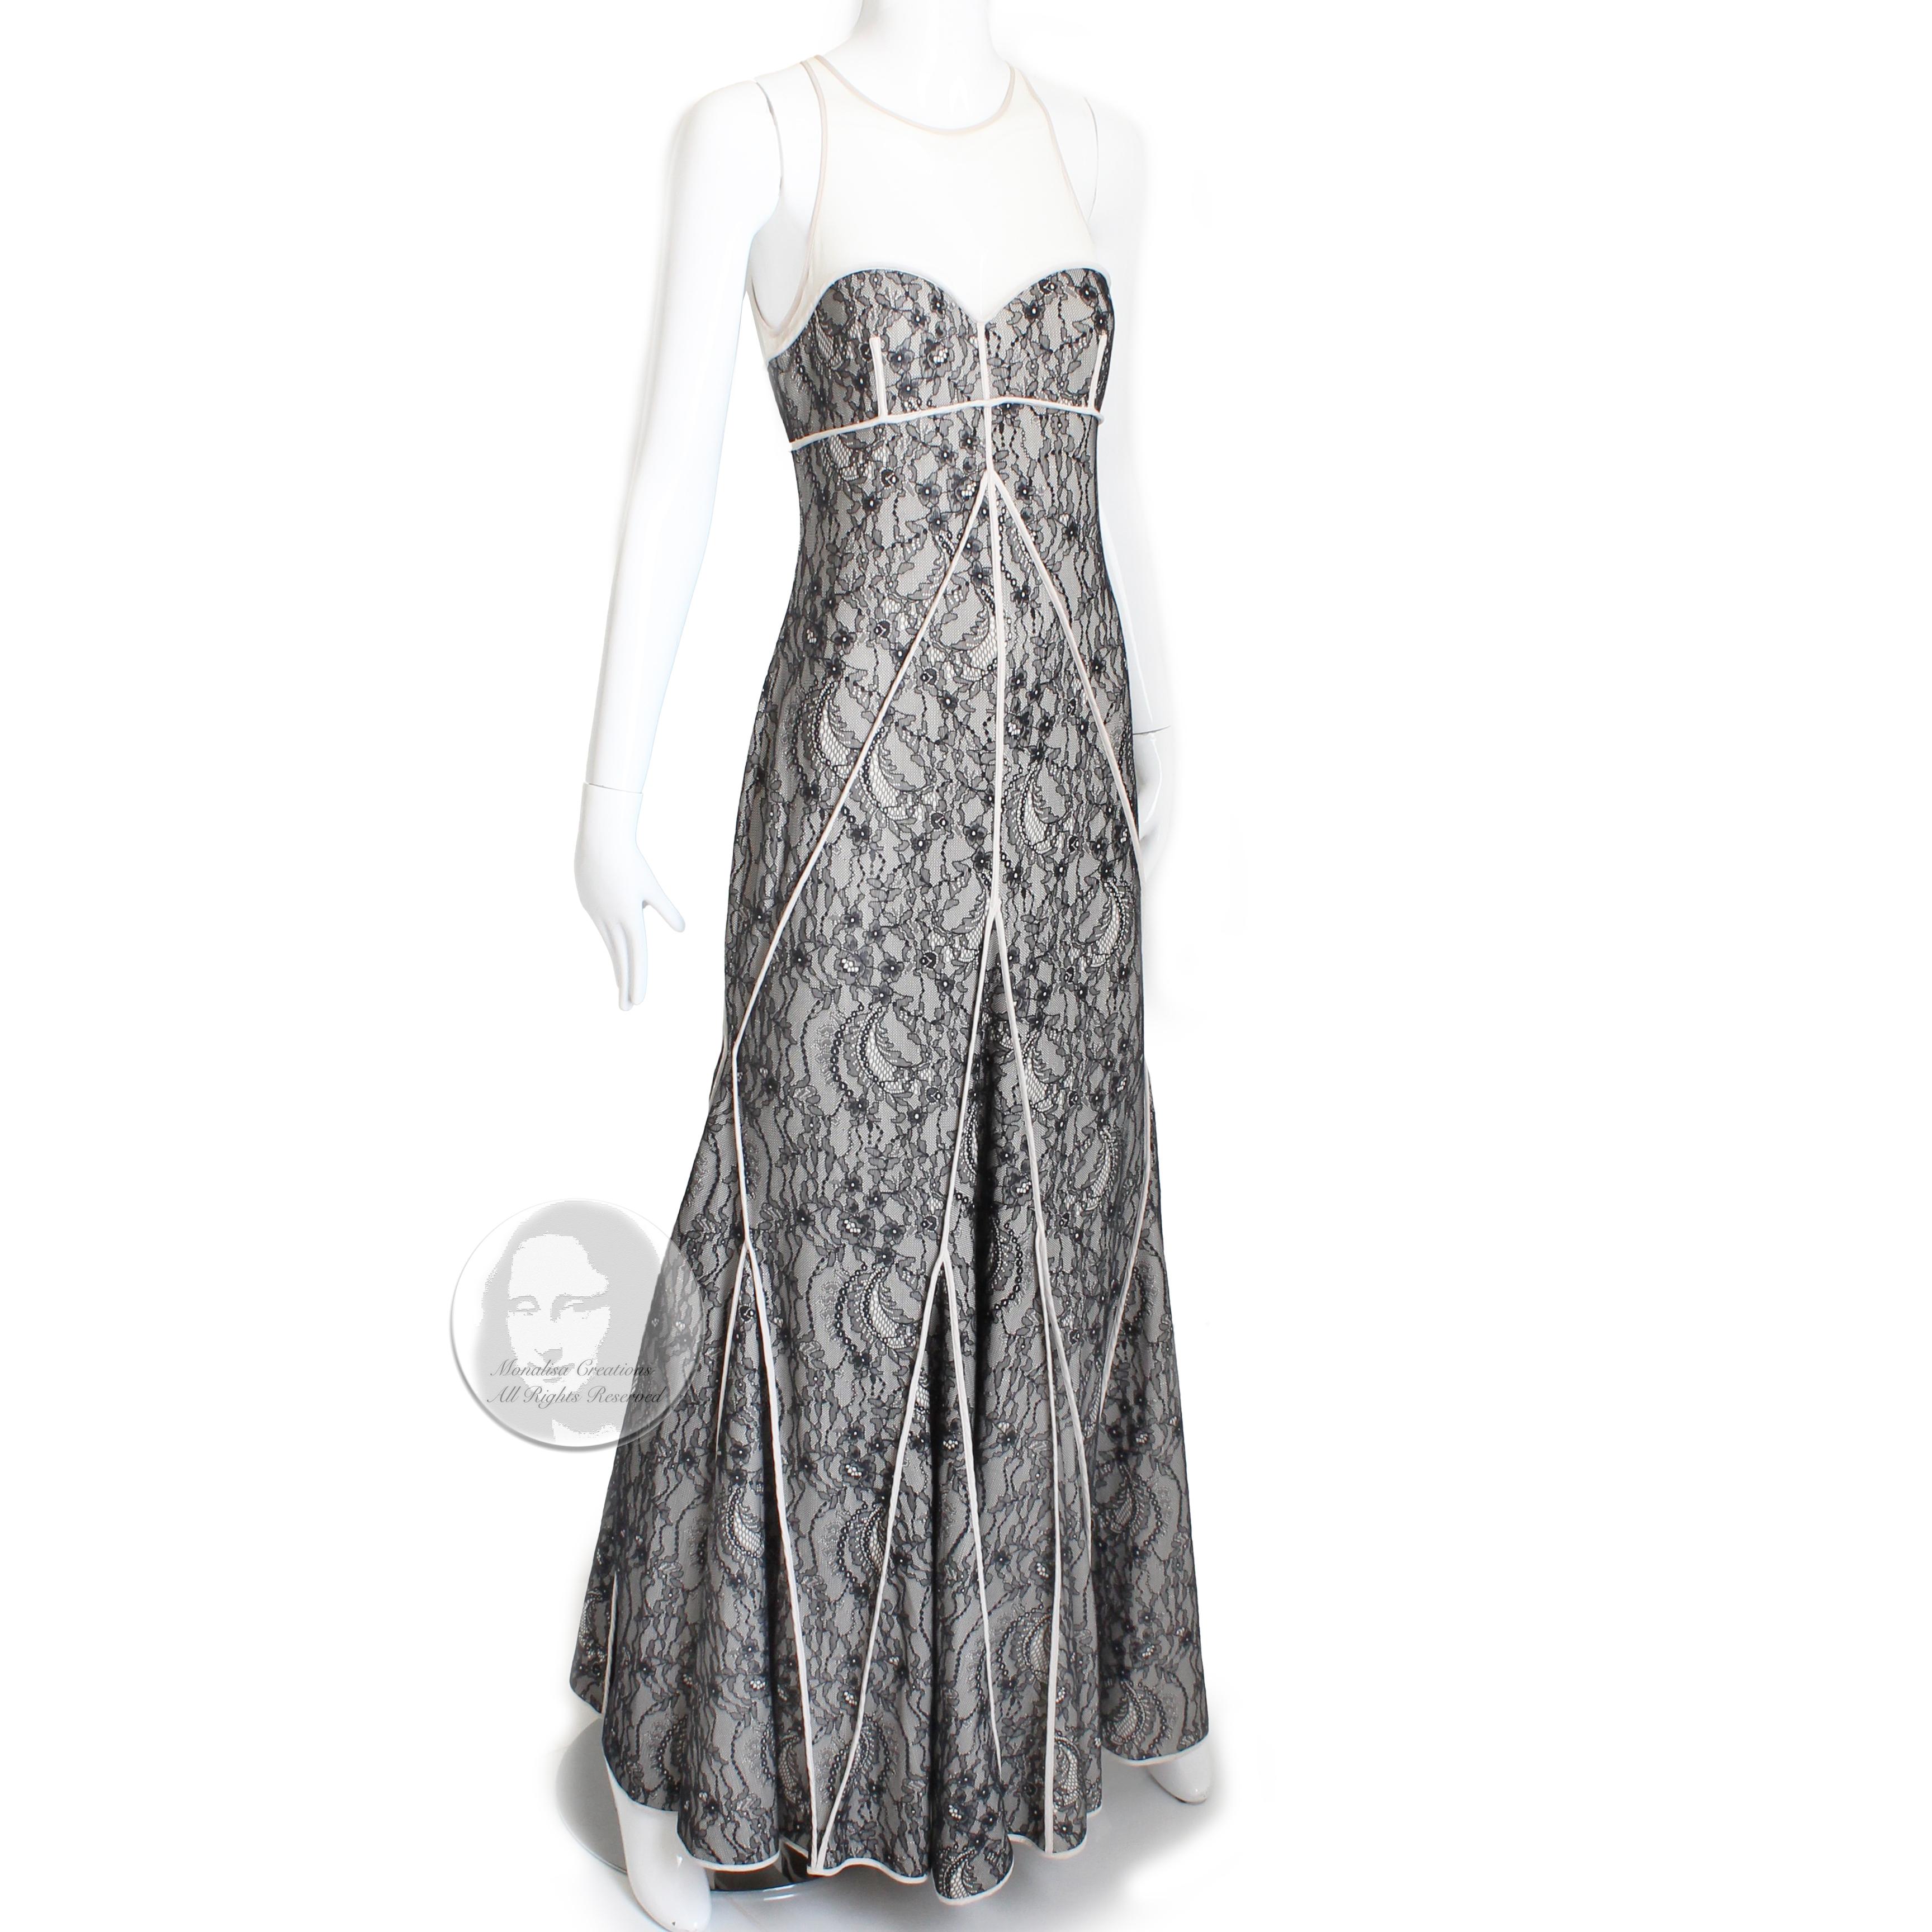 Authentic Halston Heritage long dress or evening gown, likely made post 2010. 

Made from a black and ivory illusion lace, it features a sweetheart bust line, a sheer panel scoop neck and sheer back with zipper, and a gorgeous skirt that flares with